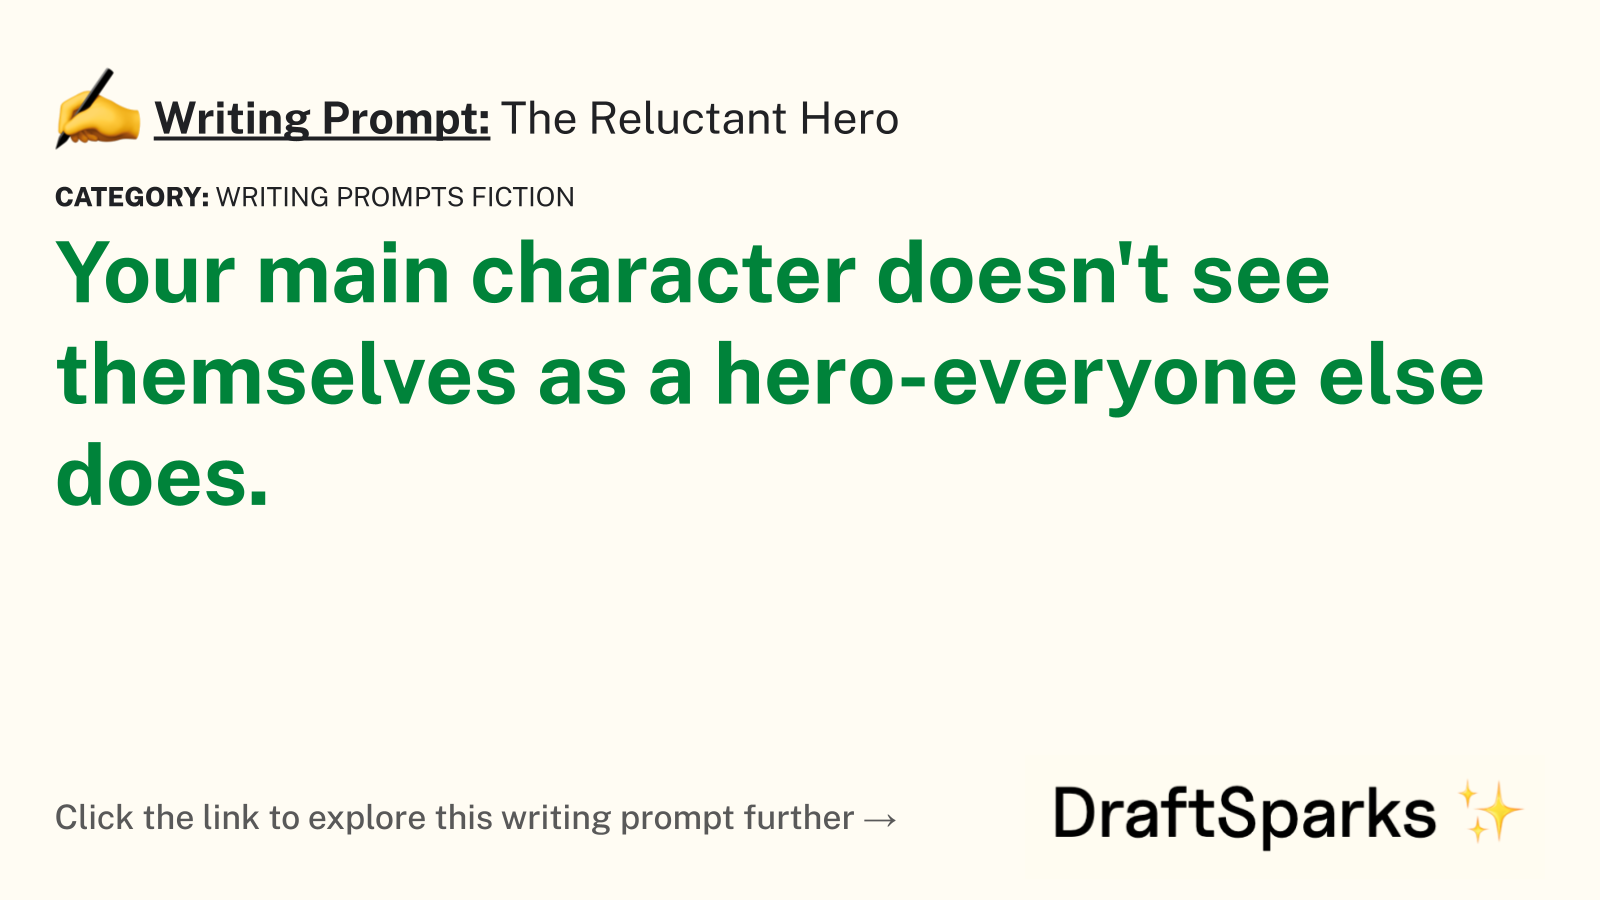 The Reluctant Hero